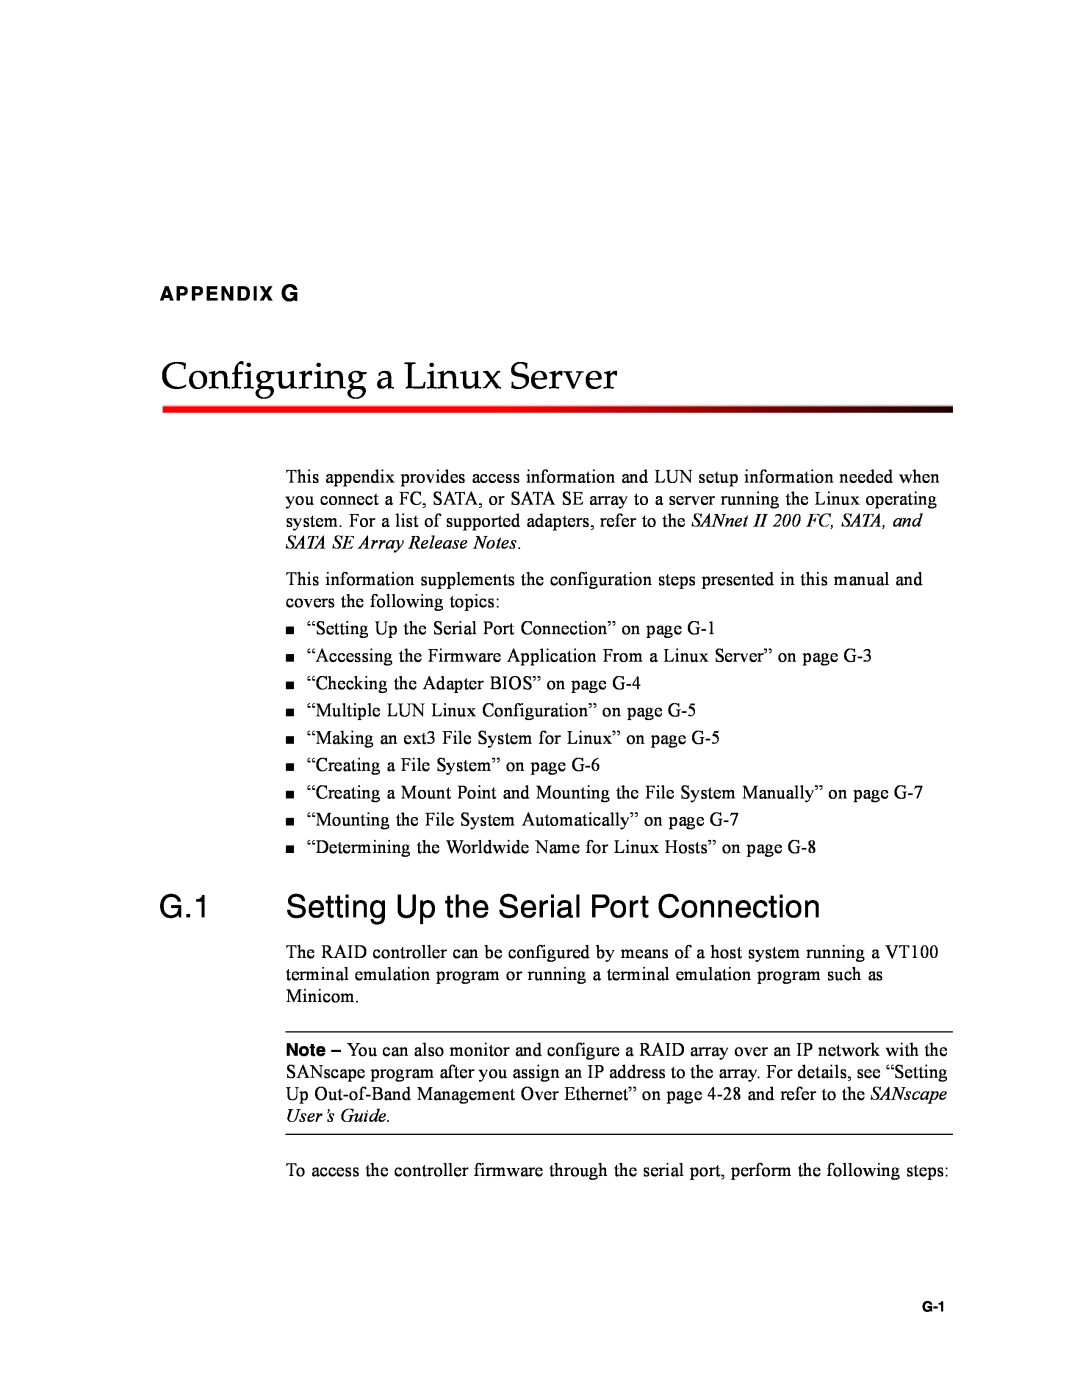 Dot Hill Systems II 200 FC service manual Configuring a Linux Server, G.1 Setting Up the Serial Port Connection, Appendix G 